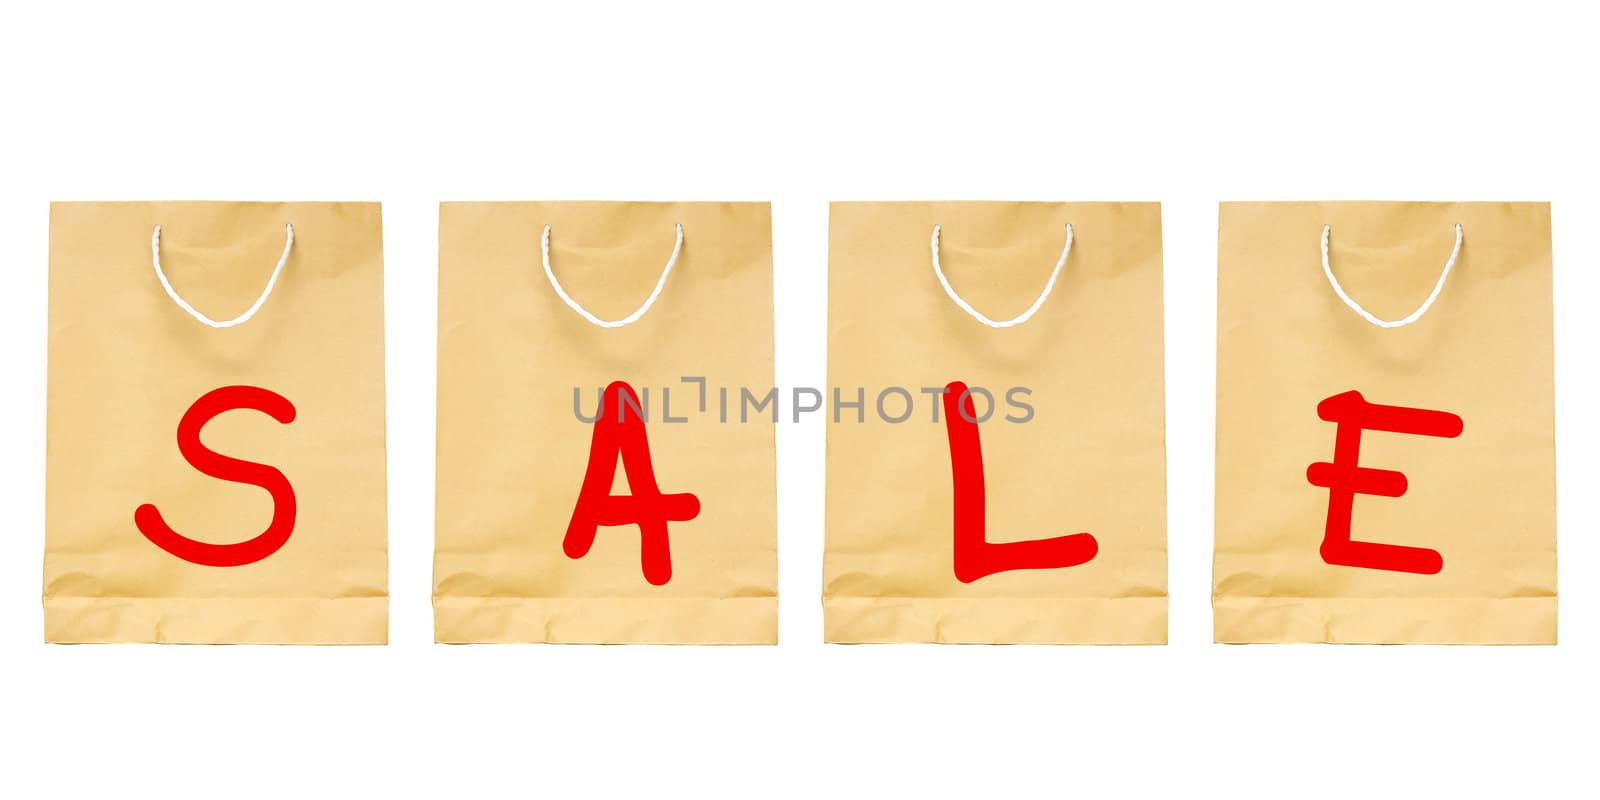 text "SALE" on shopping brown  paper bag.